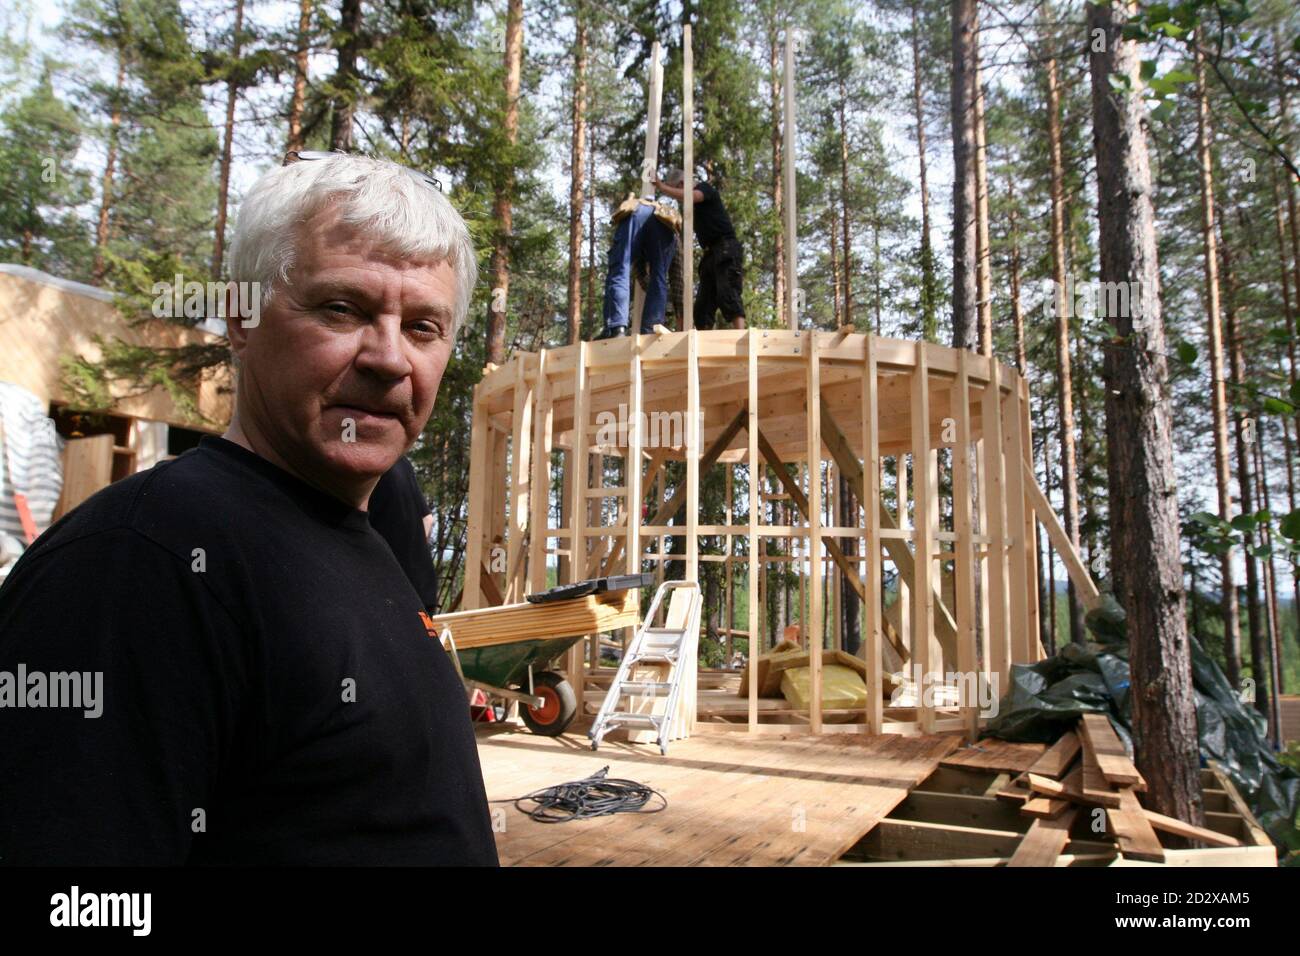 Treehotel co-founder Kent Lindvall poses for a picture in front of the TreeSauna on the construction site of Treehotel in the Swedish village of Harads, July 5, 2010. A lofty new hotel concept is set to open in a remote village in northern Sweden, which aims to elevate the simple treehouse into a world-class destination for design-conscious travellers. Treehotel, located in Harads about 60 km south of the Arctic Circle, will consist of four rooms when it opens on July 17th: The Cabin, The Blue Cone, The Nest and The Mirrorcube. Picture taken July 5, 2010.     To match Reuters Life! SWEDEN-TREE Stock Photo